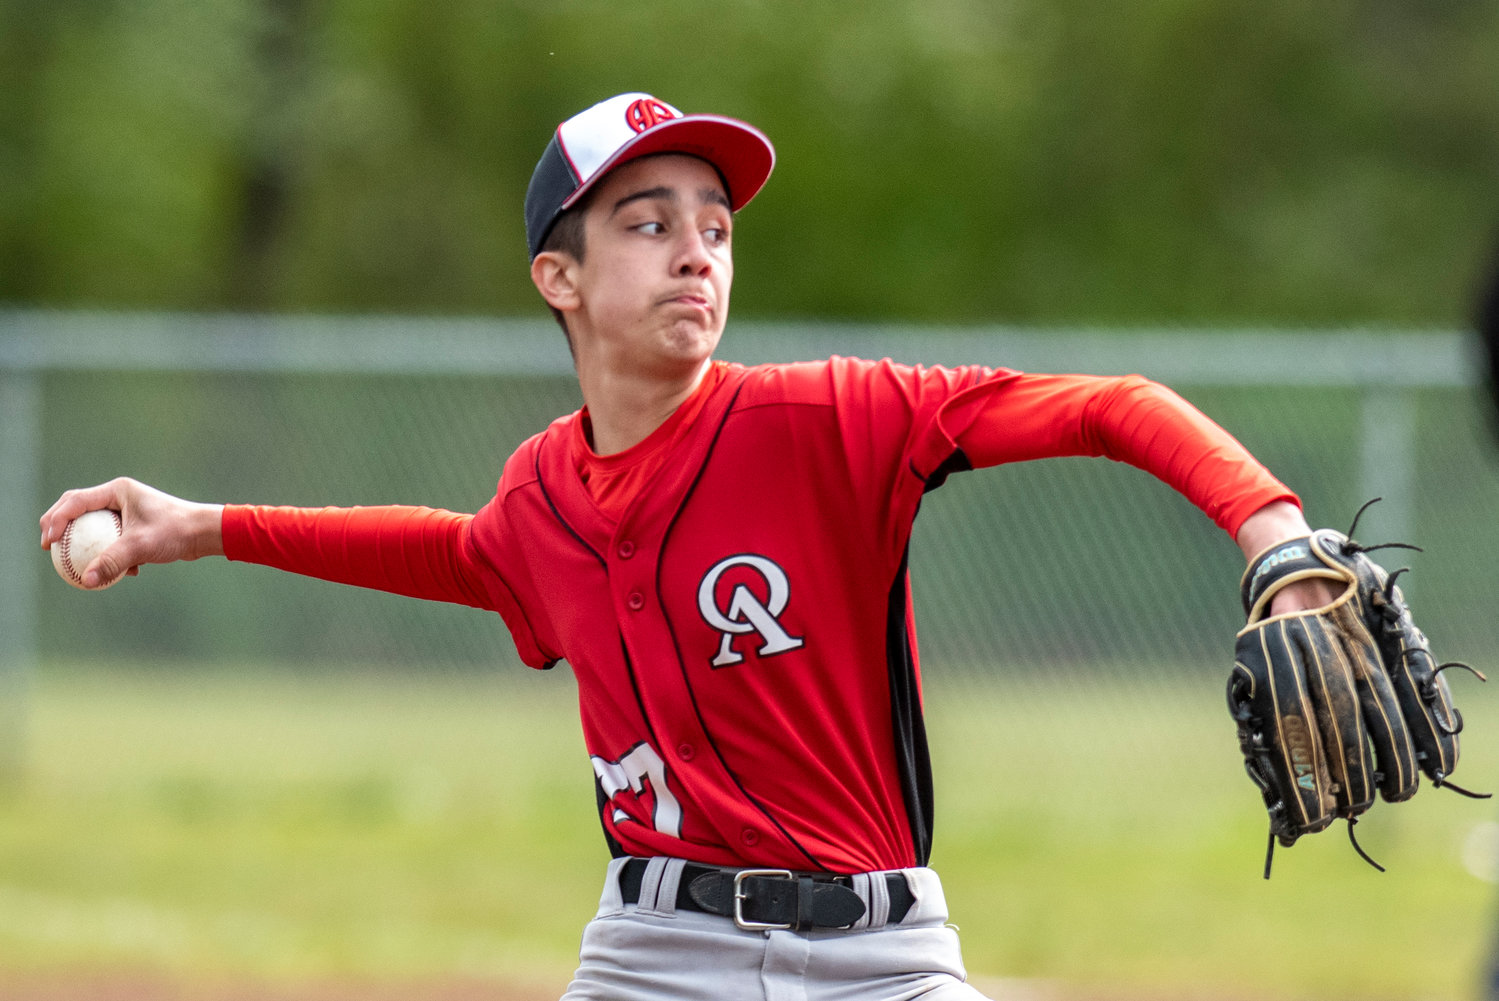 Oakville's Daniel Rodas winds up to deliver a pitch during a home game against Mossyrock at Legends Field Complex on April 28.